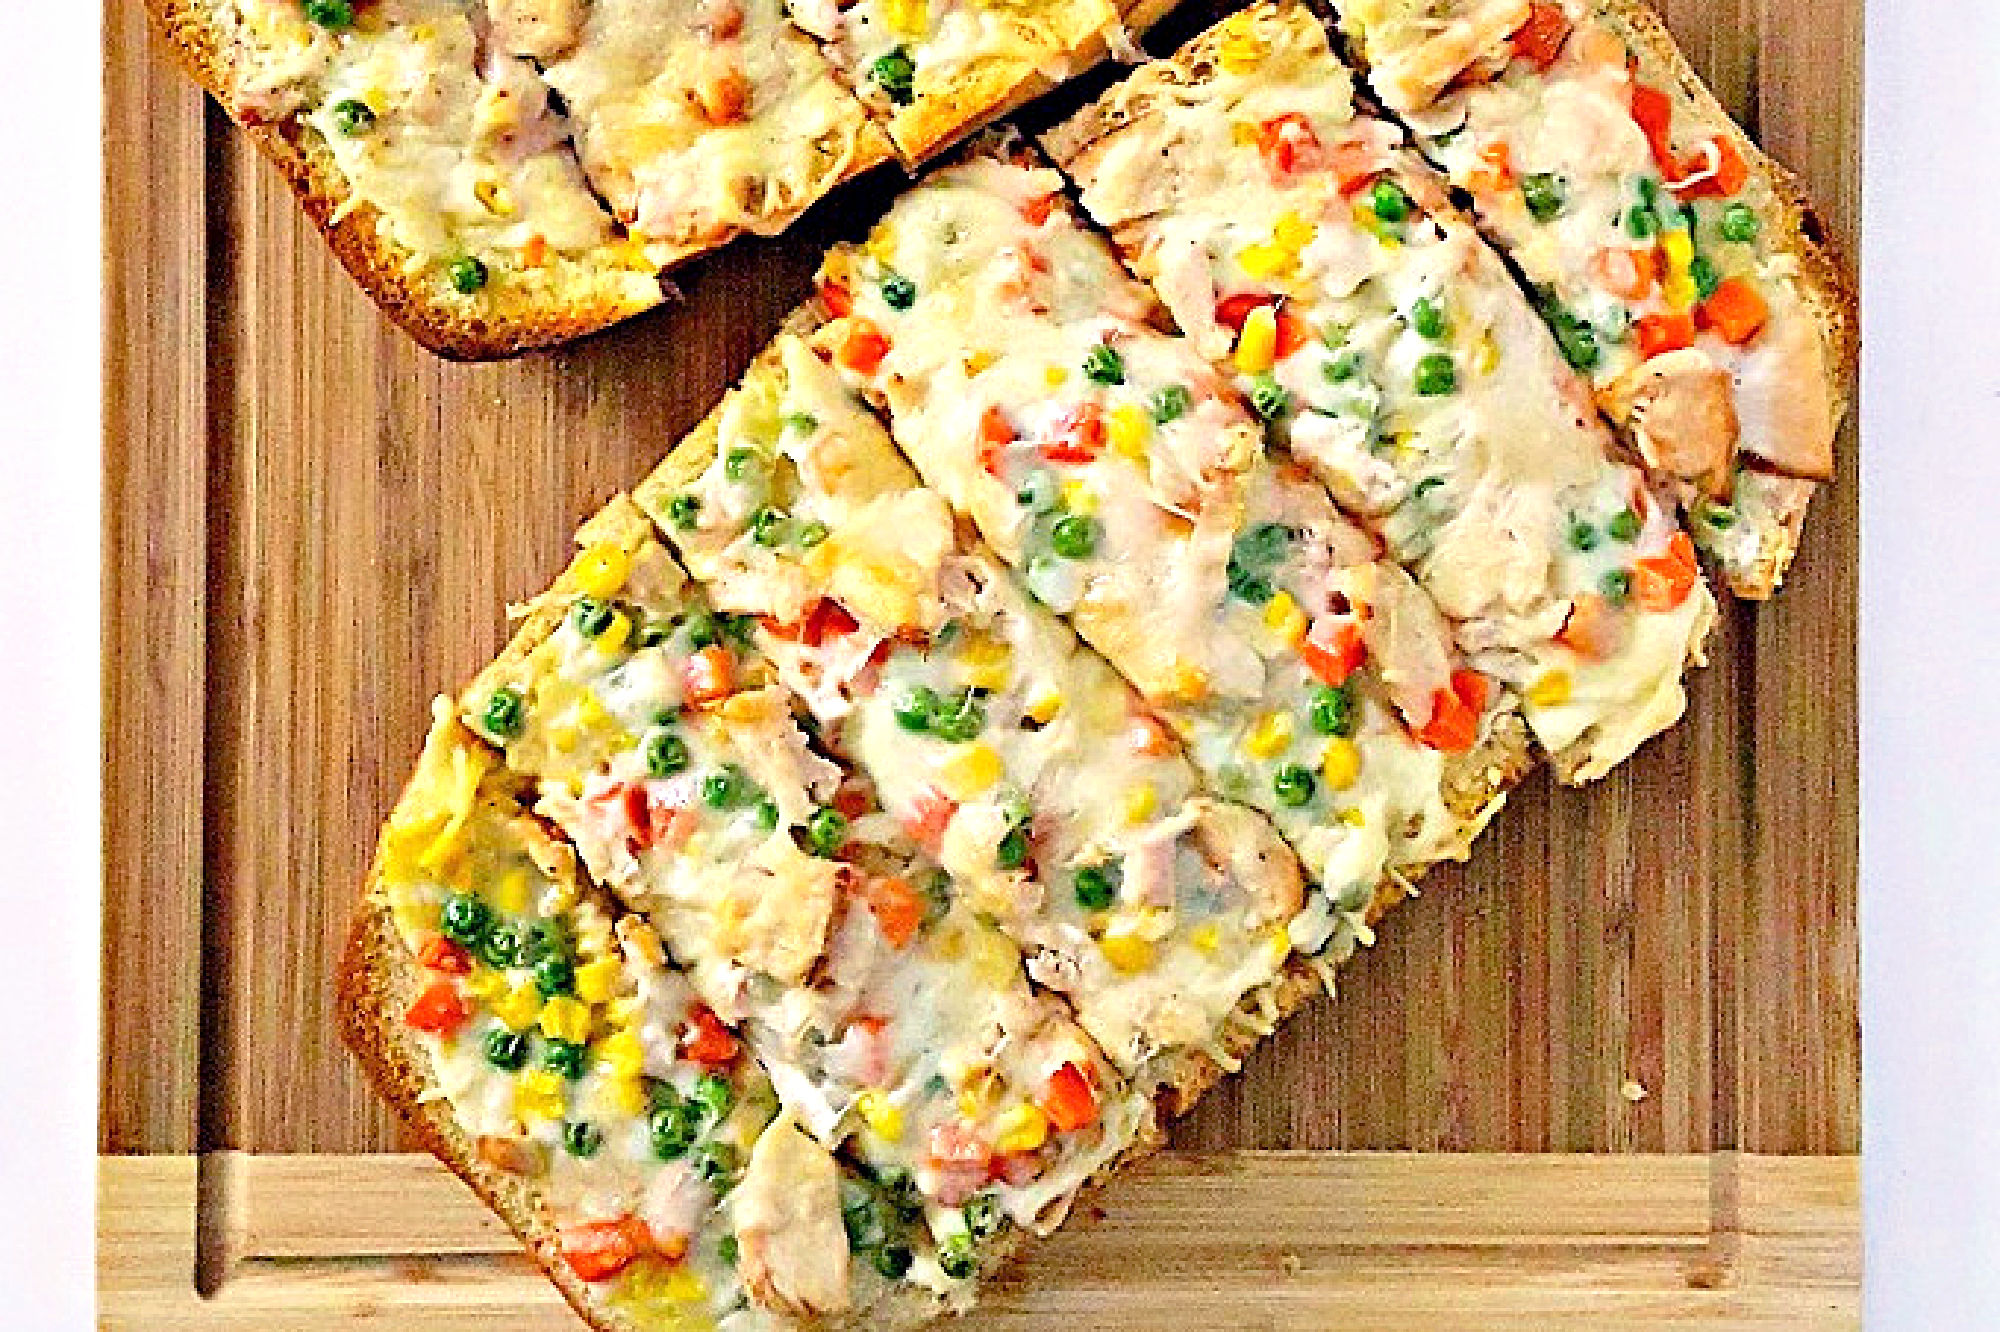 Get ready for a flavor explosion with Chicken Pot Pie French Bread Pizza.  It's the ultimate comfort food mashup. Trust us, one bite and you'll be hooked. #OurFamilyTable #ChickenPotPiePizza #FrenchBreadPizza #EasyDinnerRecipes #HomemadeComfortFood #FamilyDinnerIdeas
